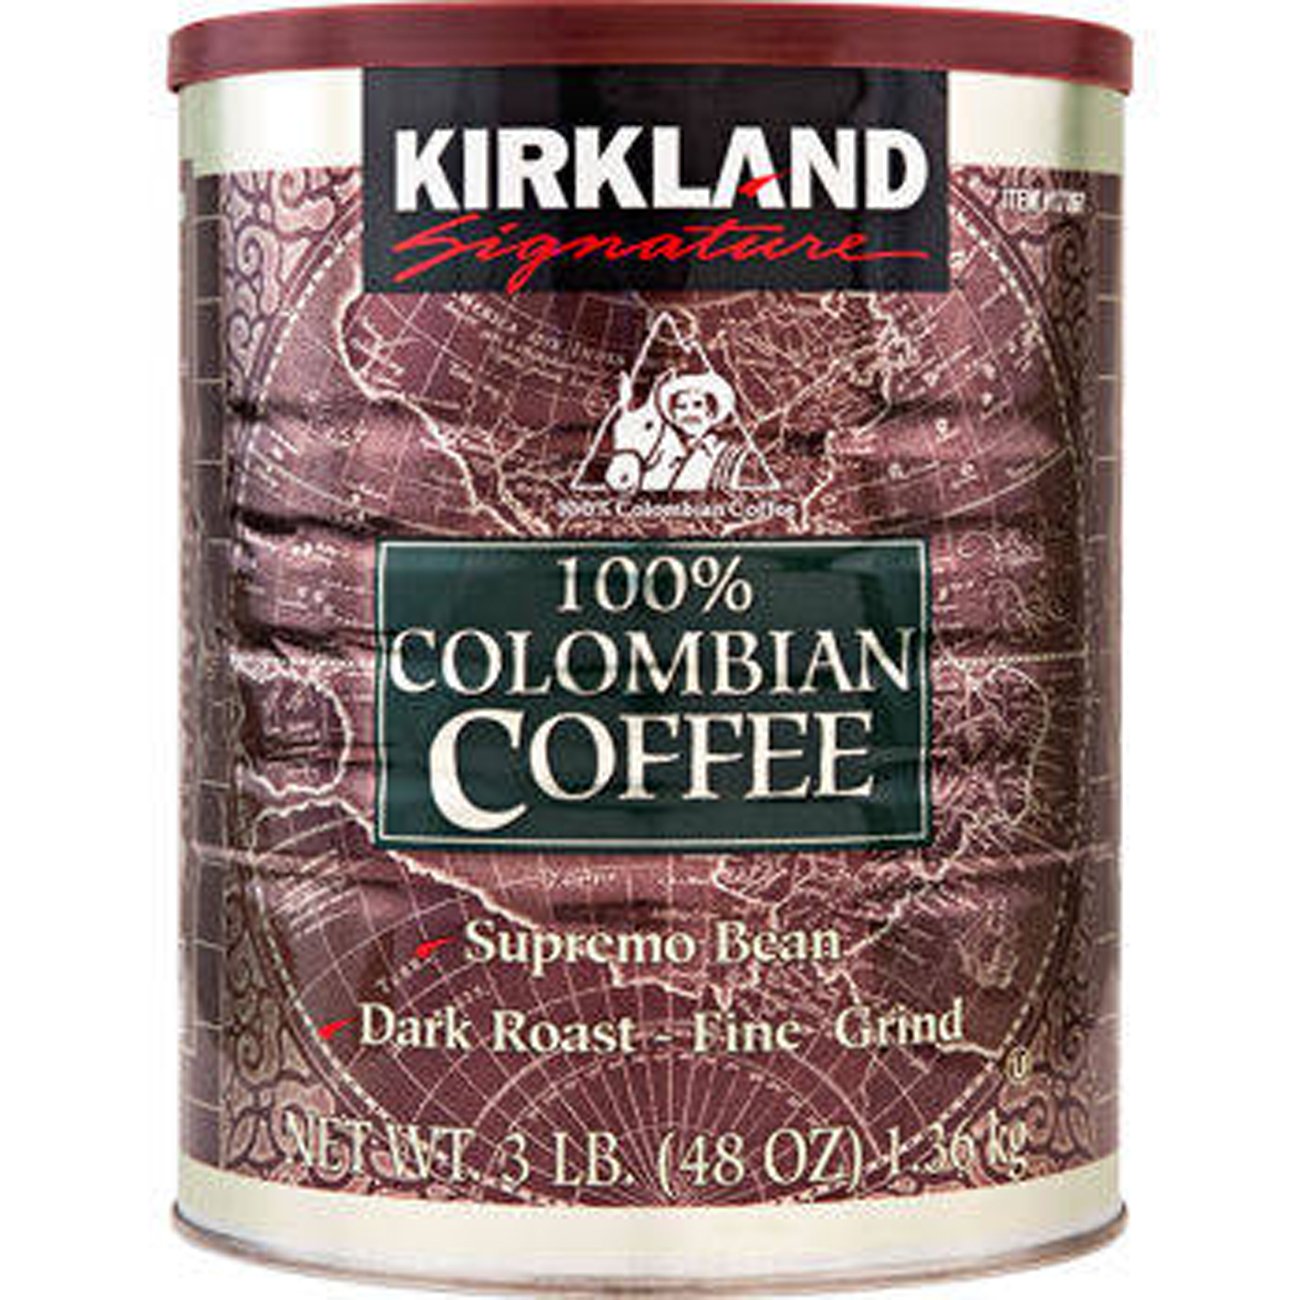 I'm not a Costco member anymore, so this is great. I can't source an alternative this good at any price. (Costco guards the secret of their beans & their roaster closely.)